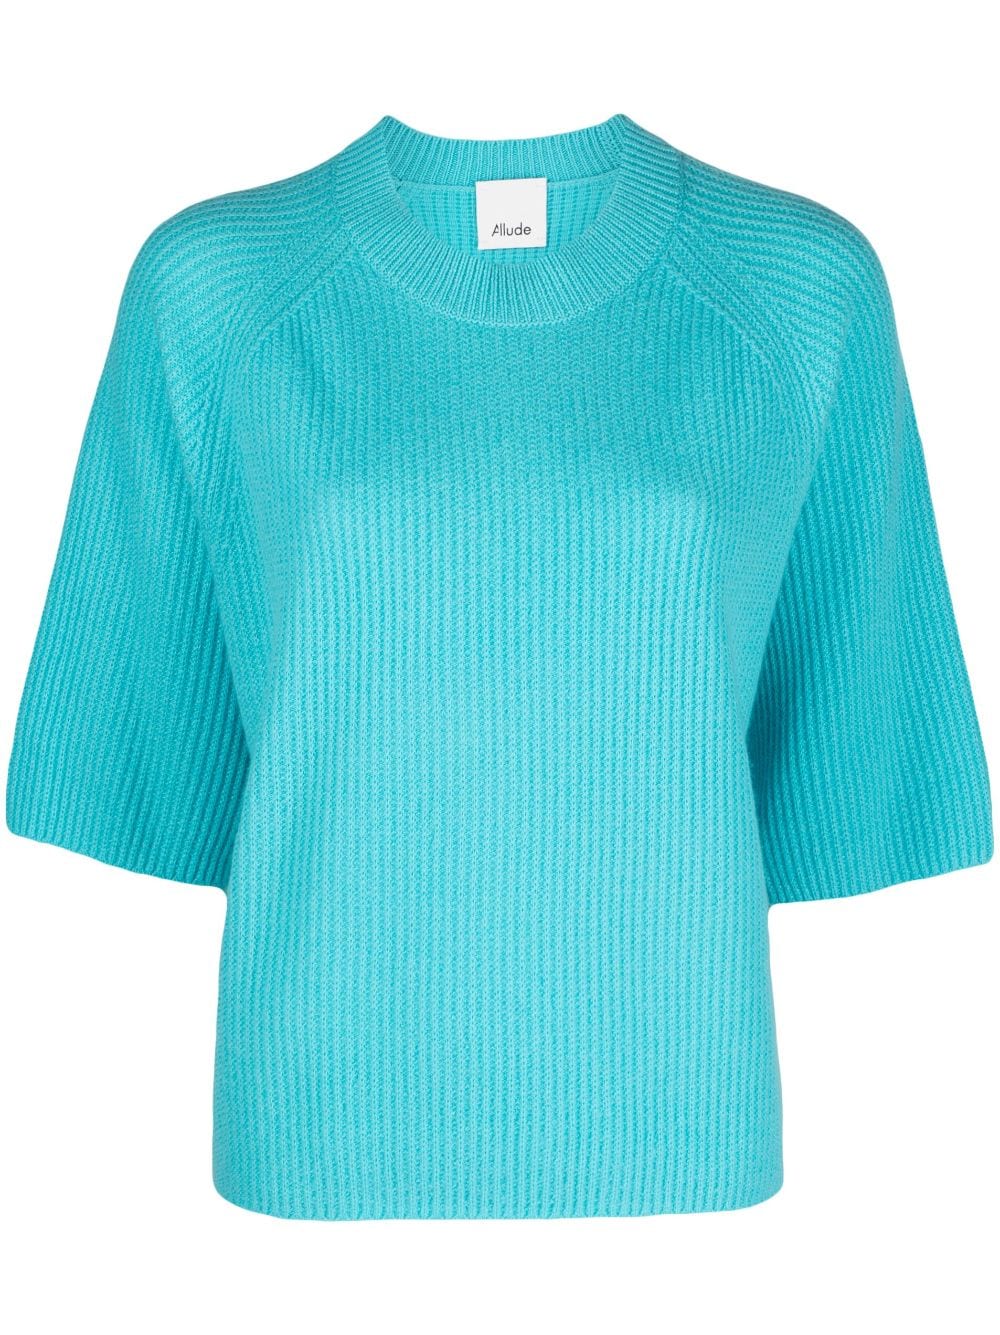 Allude ribbed cashmere knitted top - Blue